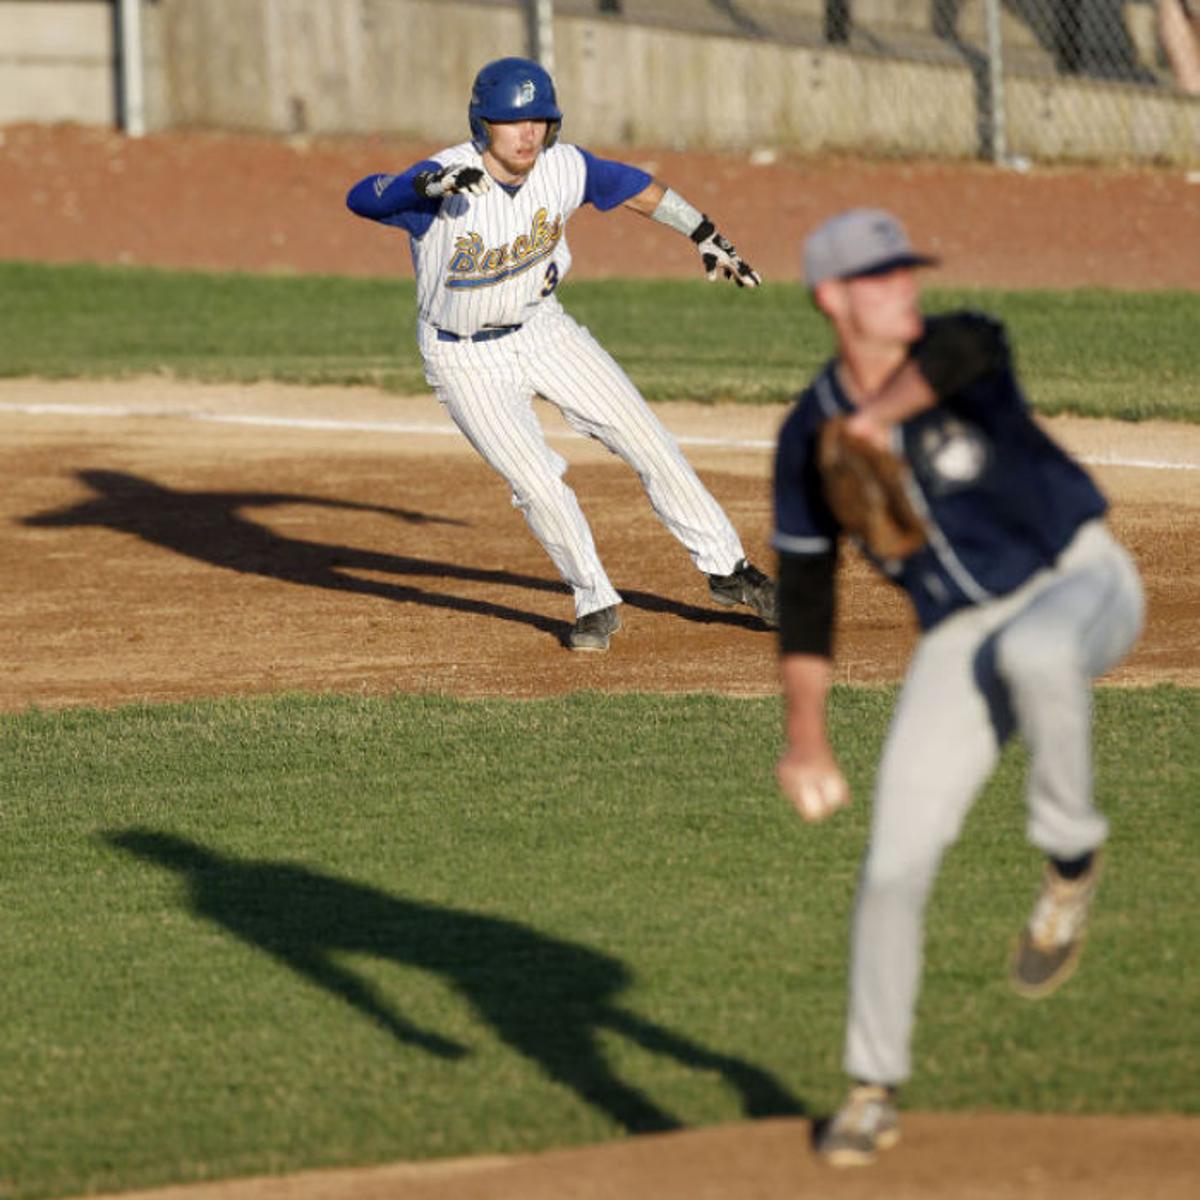 Bucks Gain Ground With 10 Inning Victory Baseball Wcfcourier Com